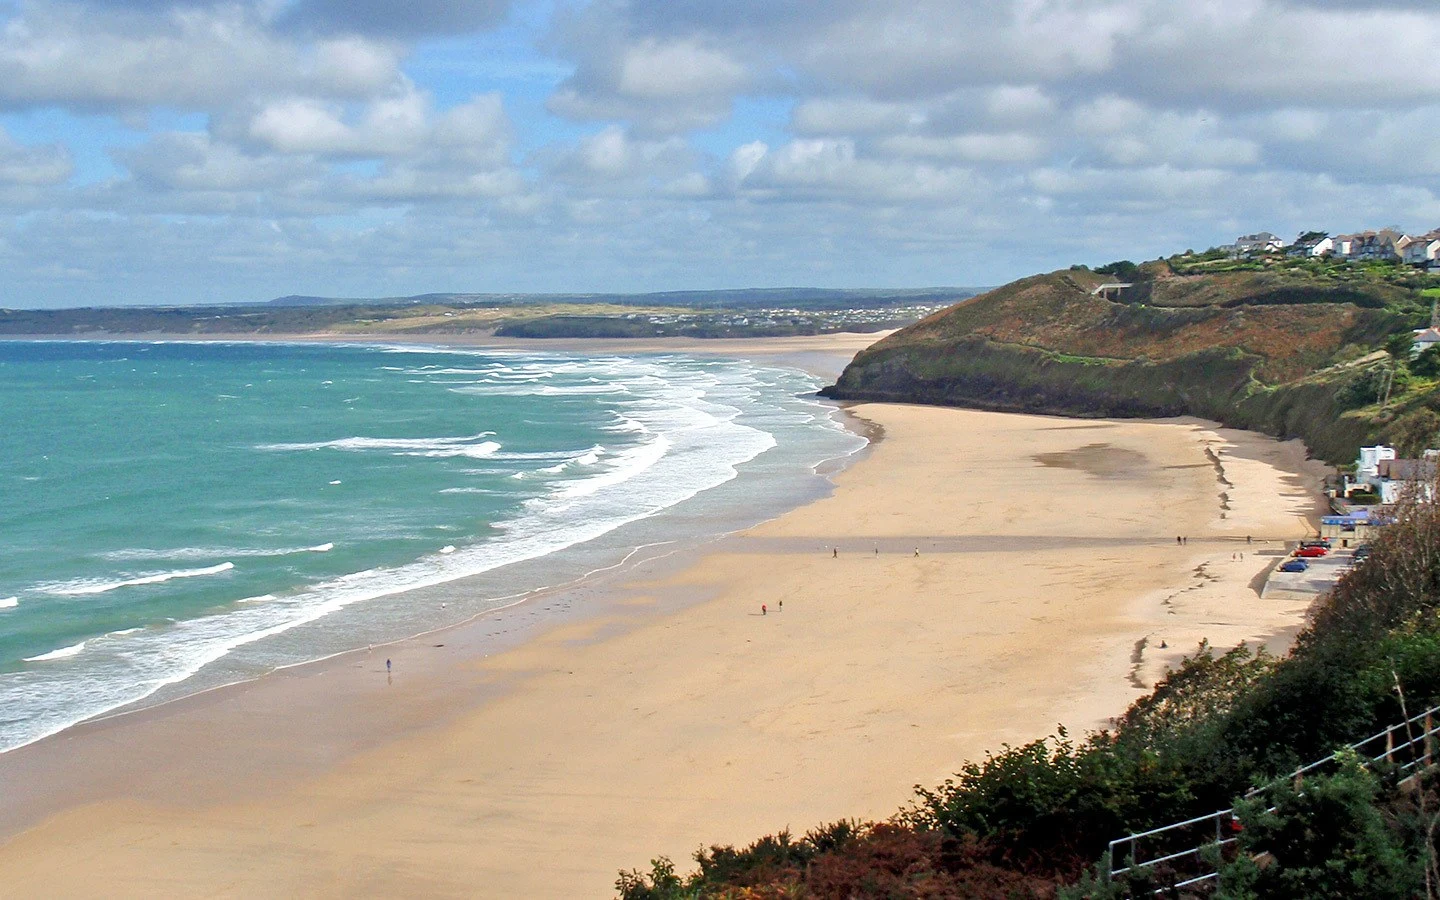 Views from the scenic St Ives Bay Line train route in Cornwall, south-west England